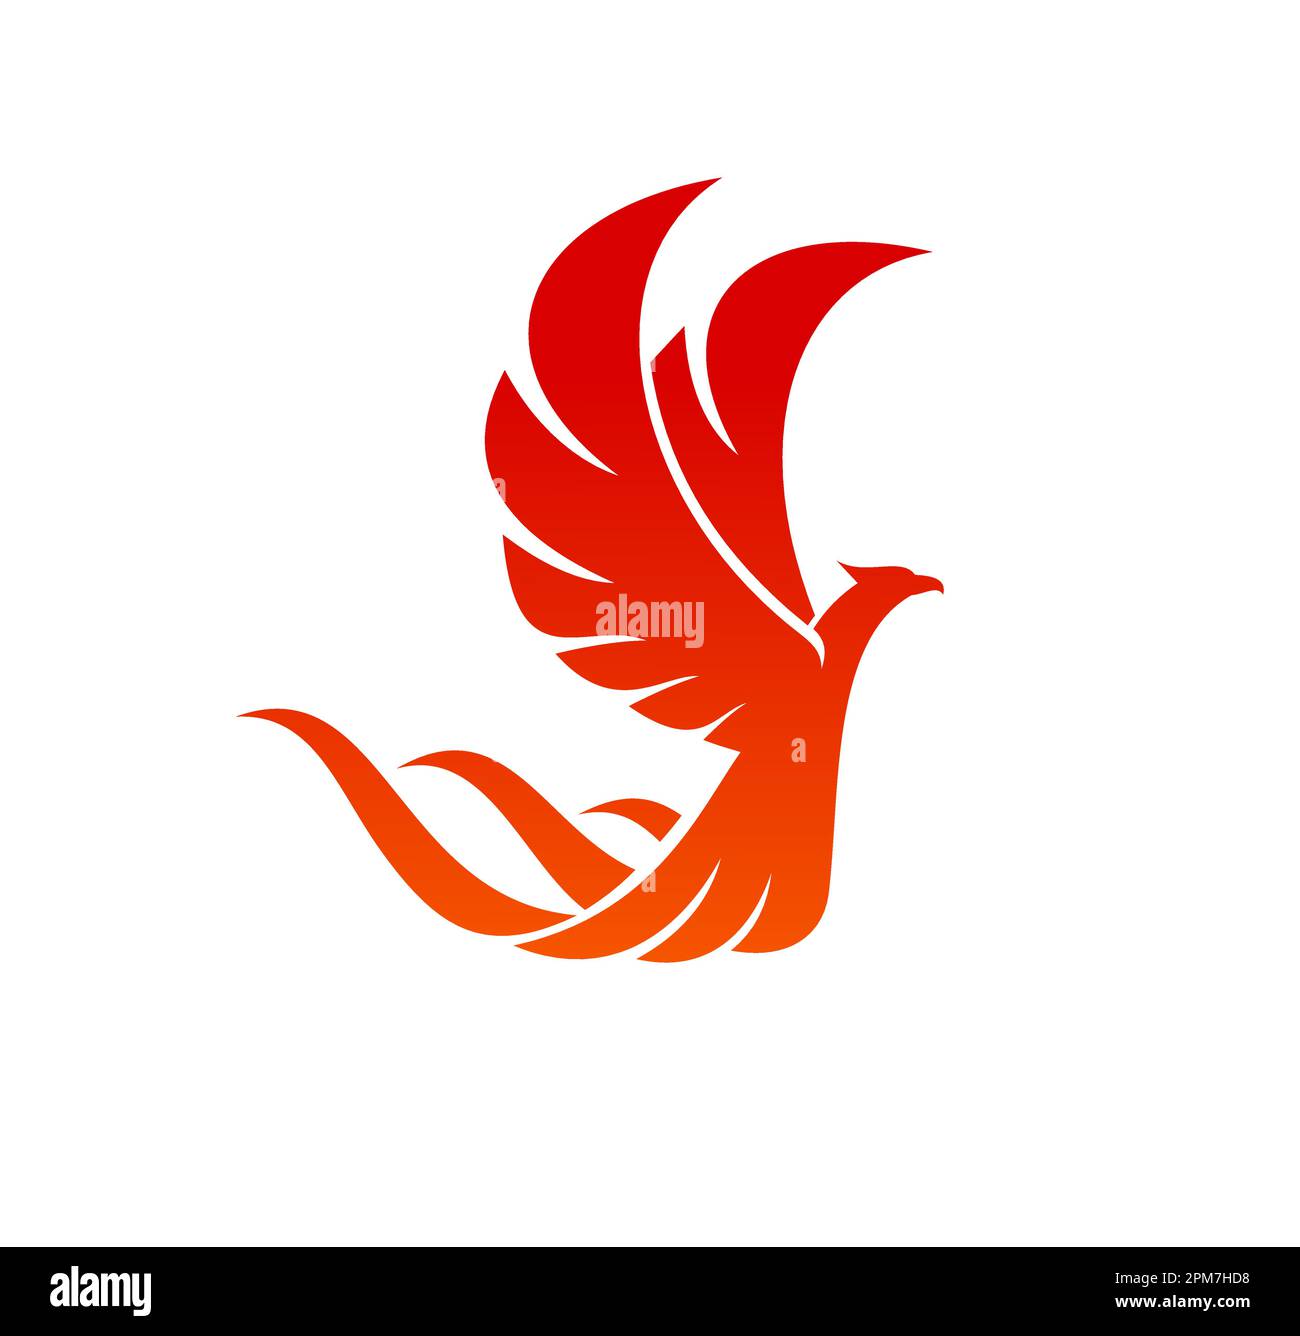 Phoenix bird with fire wings and tail. Vector fenix or phoenix fantasy firebird with flaming feathers and bright red flames isolated symbol of rebirth Stock Vector